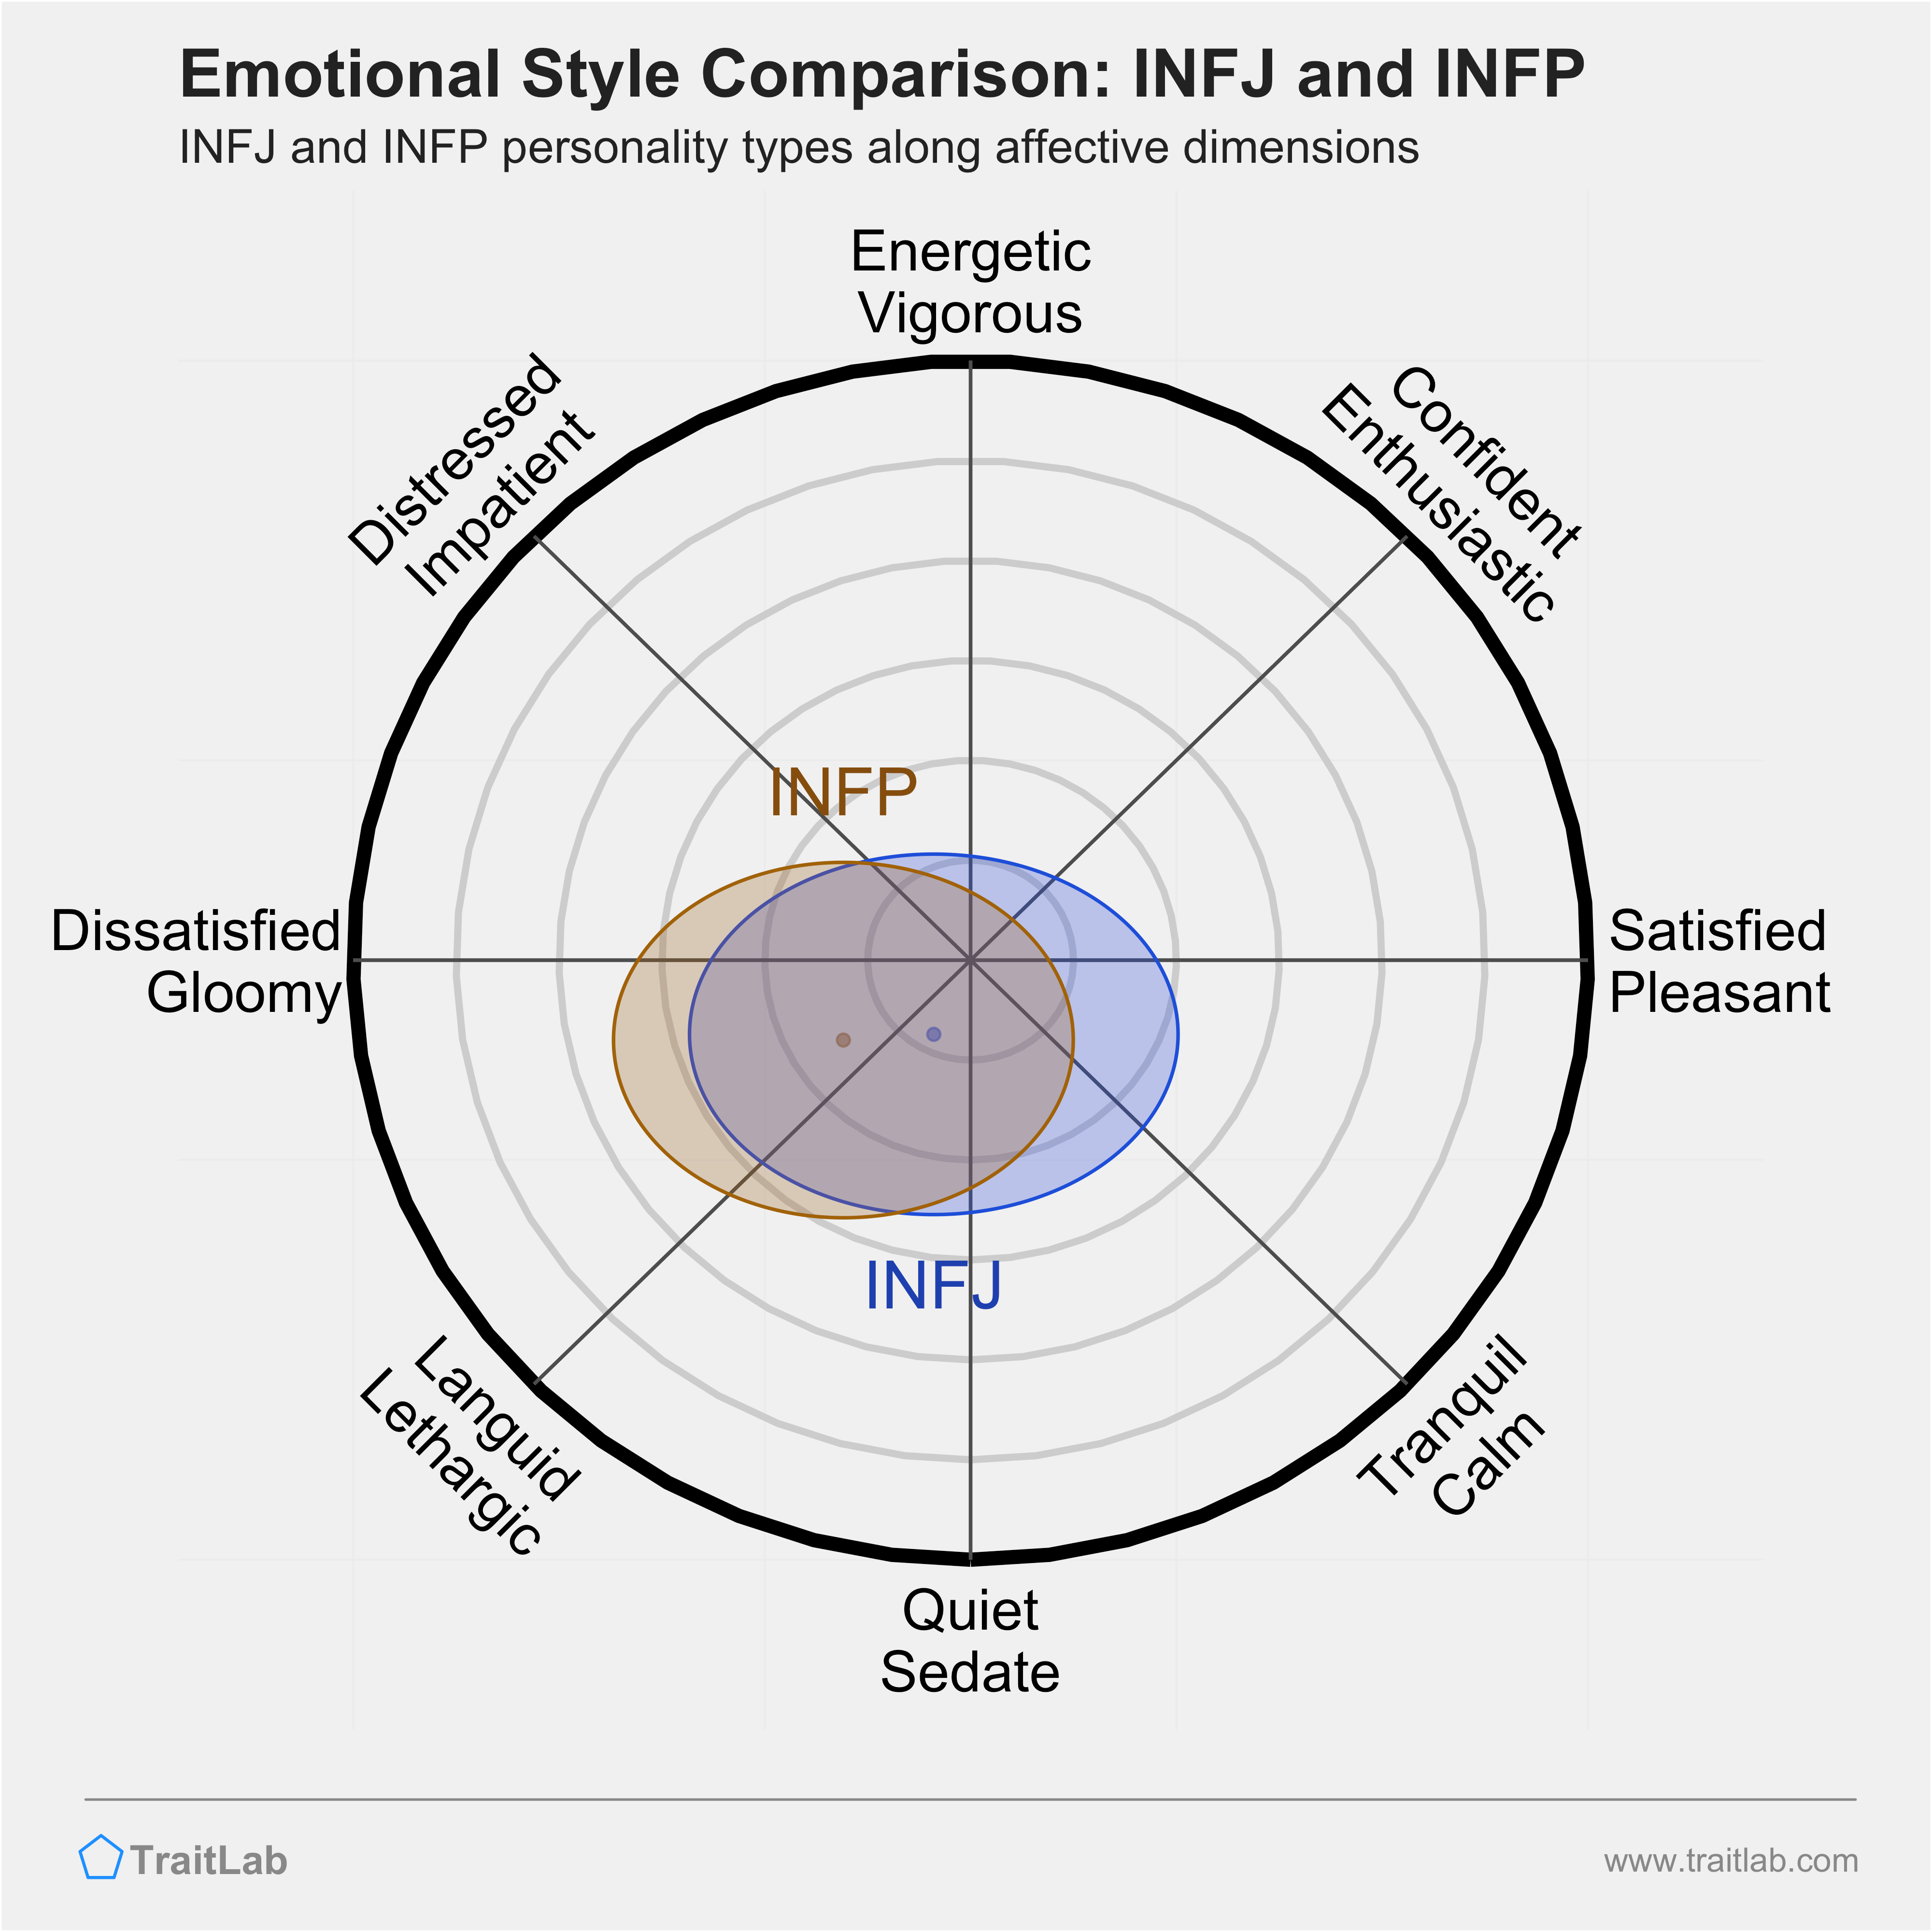 INFJ and INFP comparison across emotional (affective) dimensions